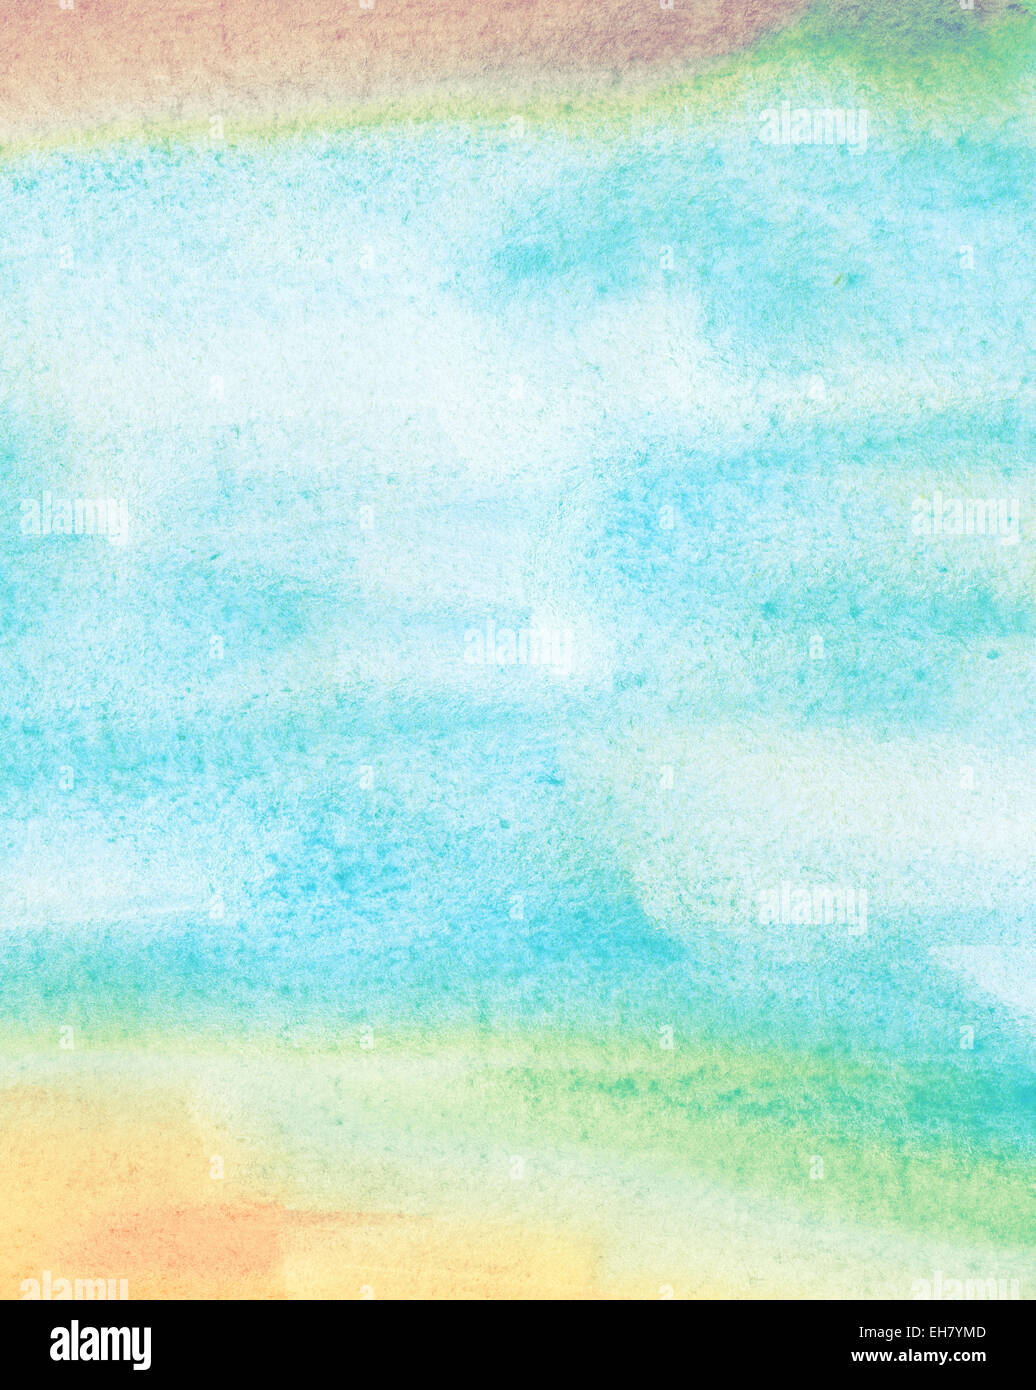 Abstract watercolor sky Stock Photo